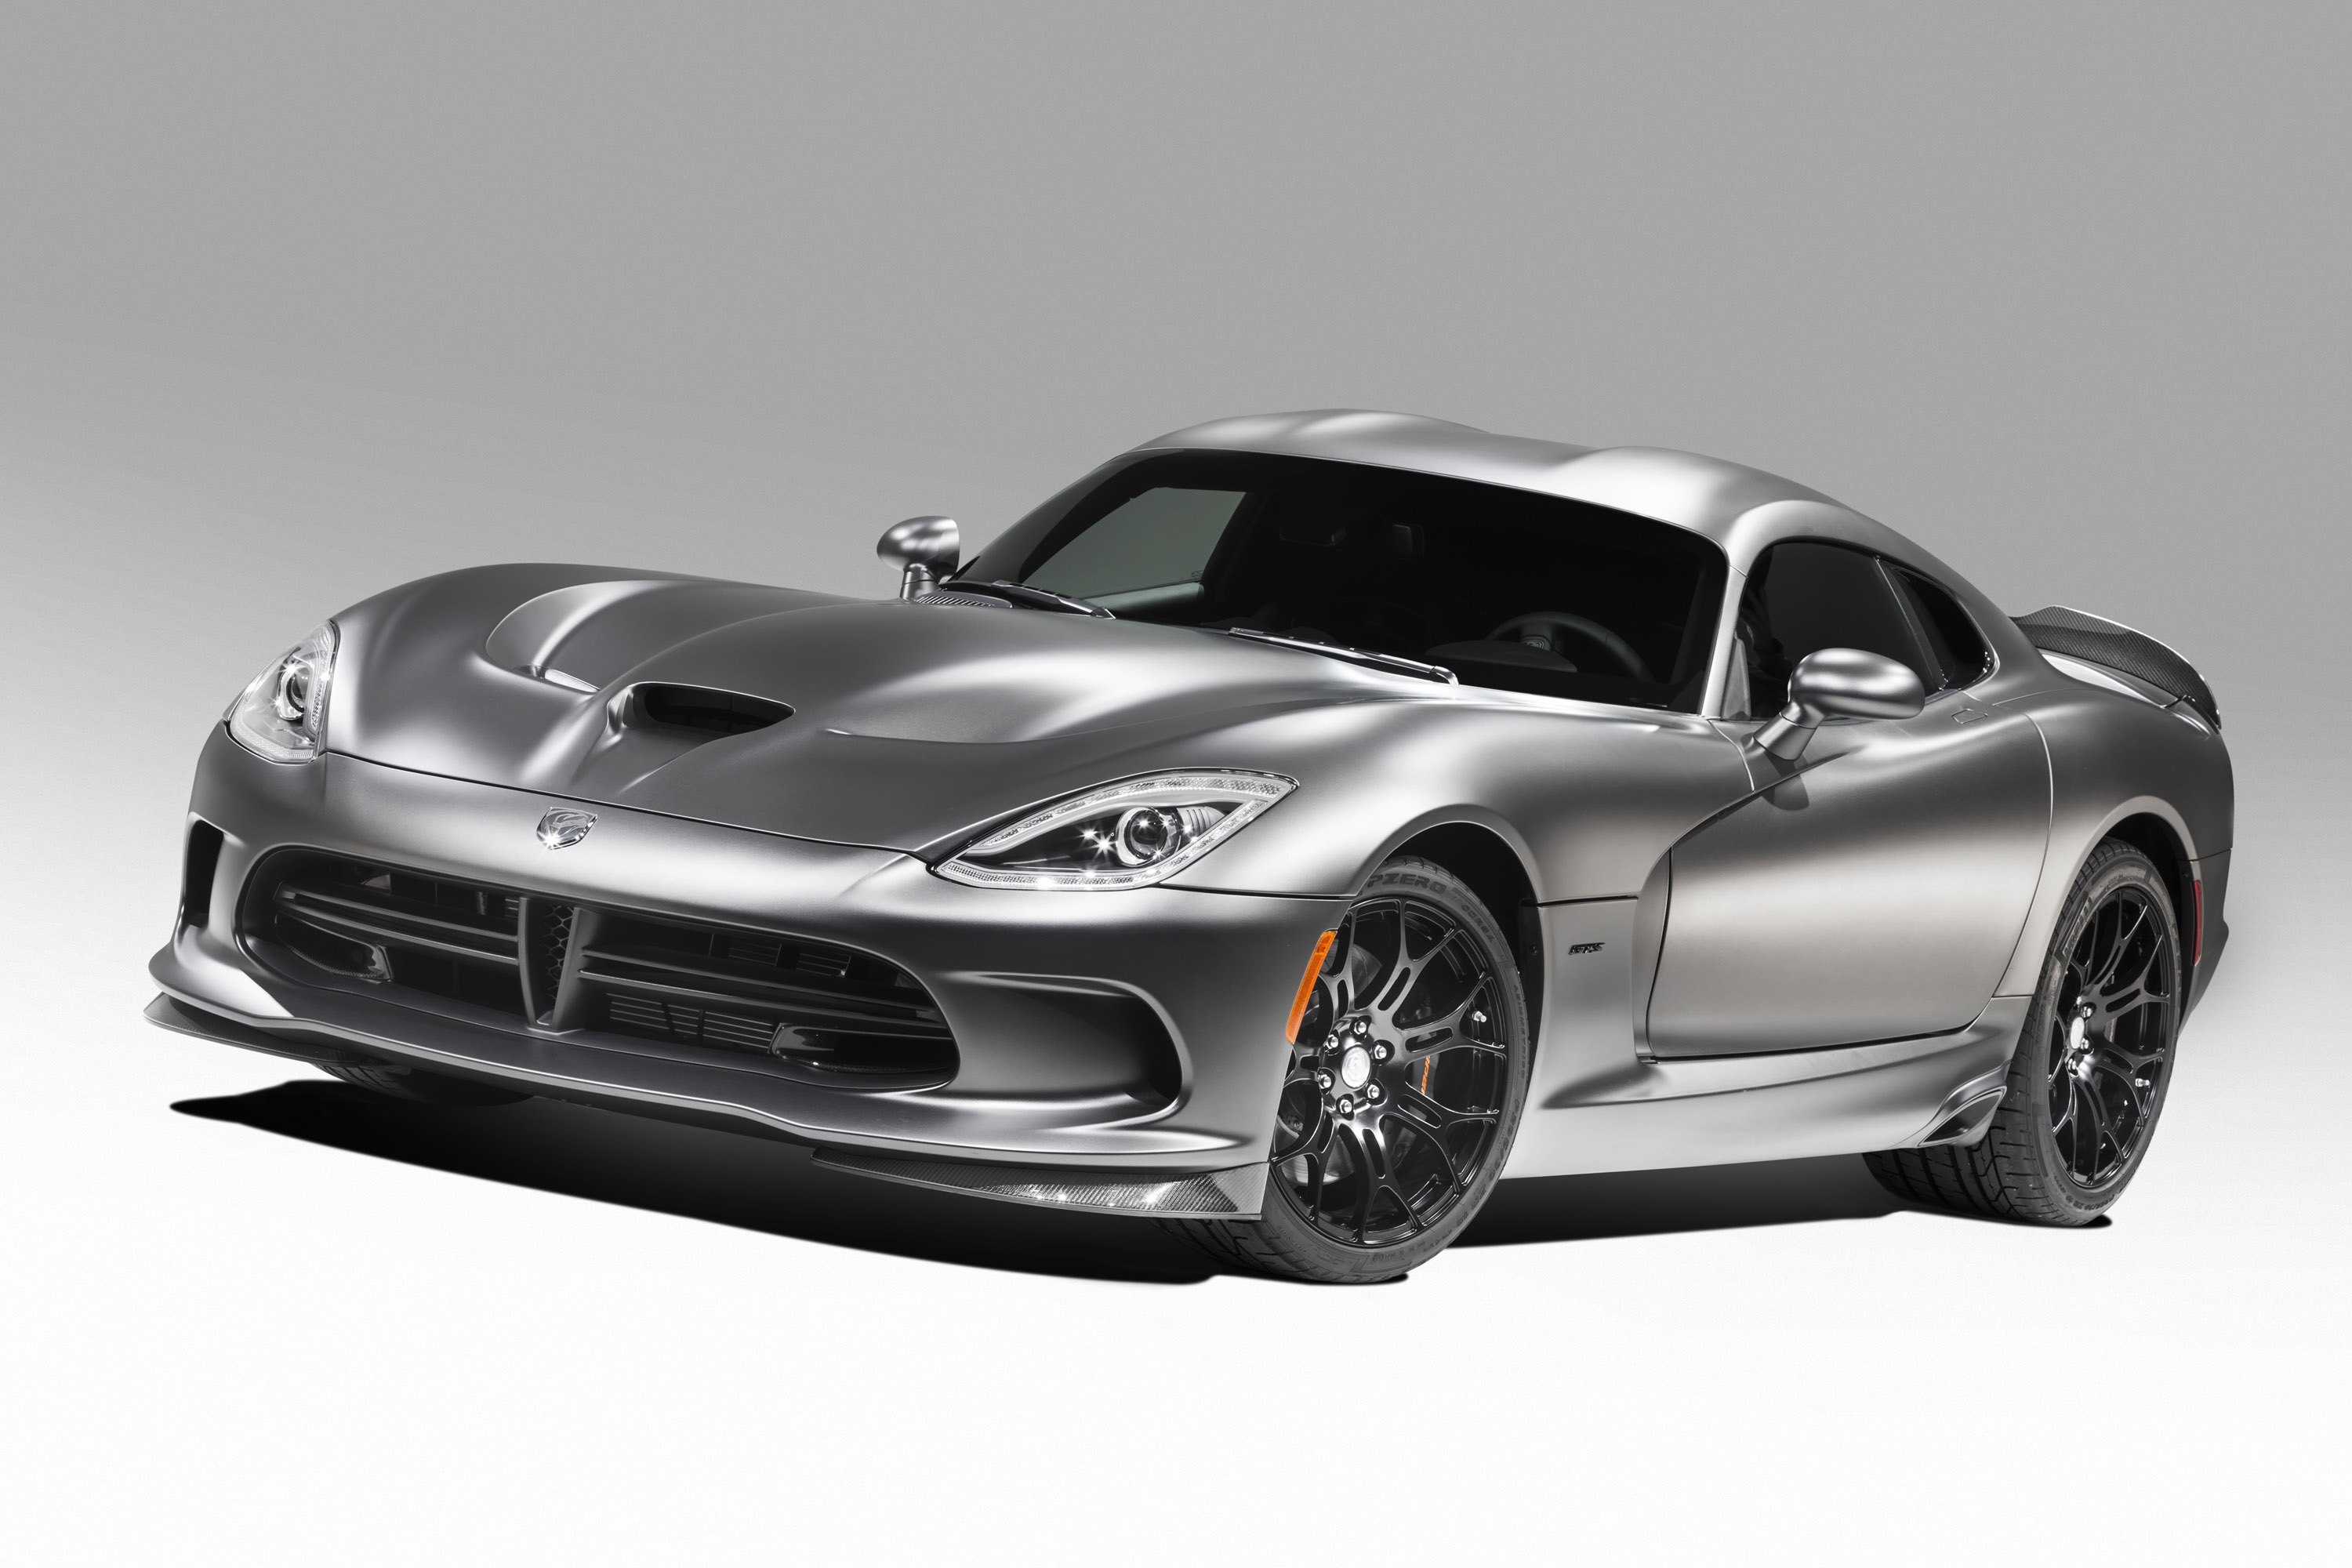 Dodge Viper GTS Time Attack Carbon Special Edition